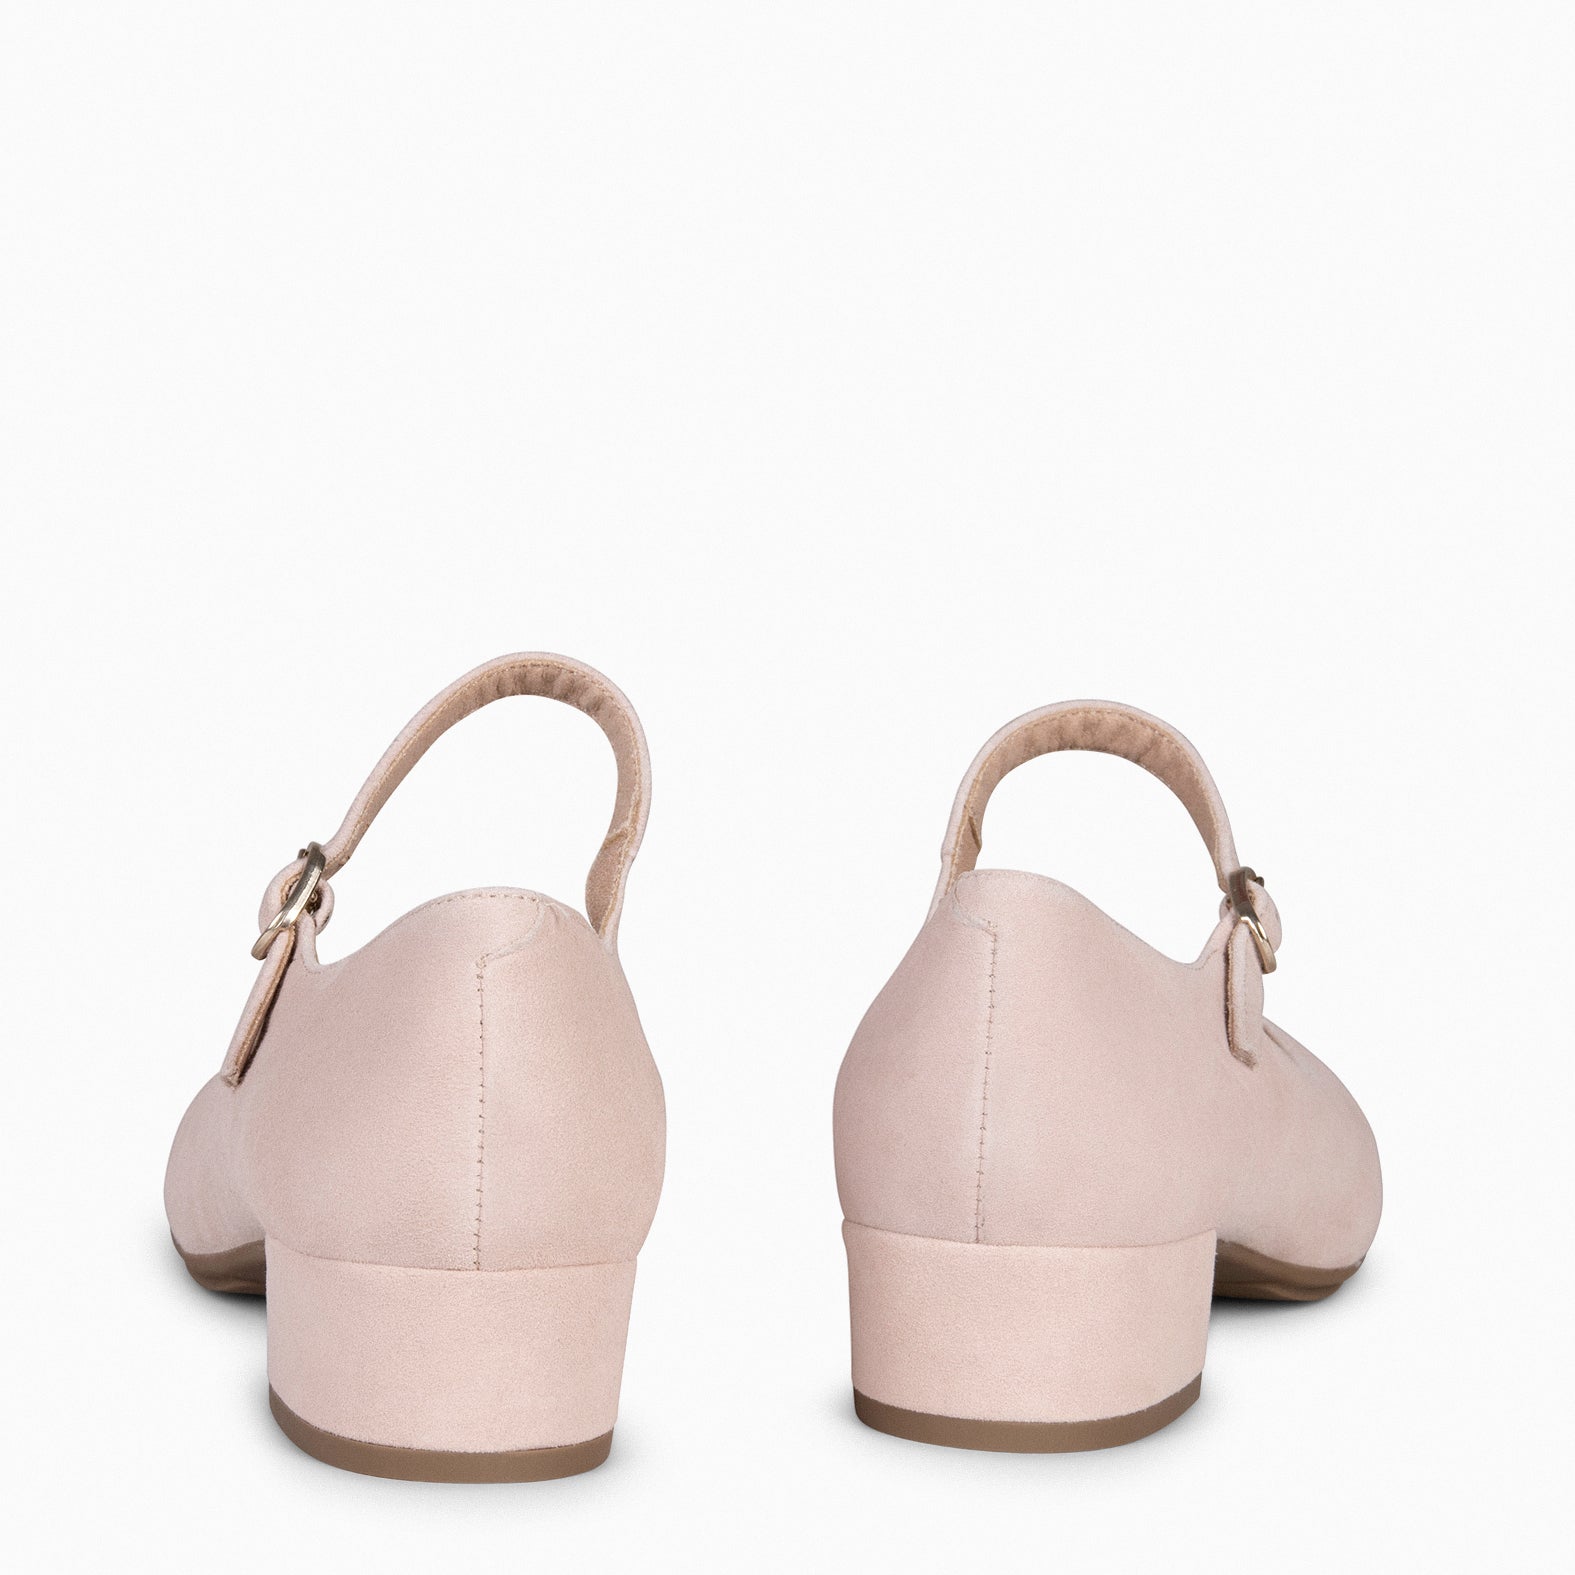 NORA – NUDE Mary-Janes with low heel 